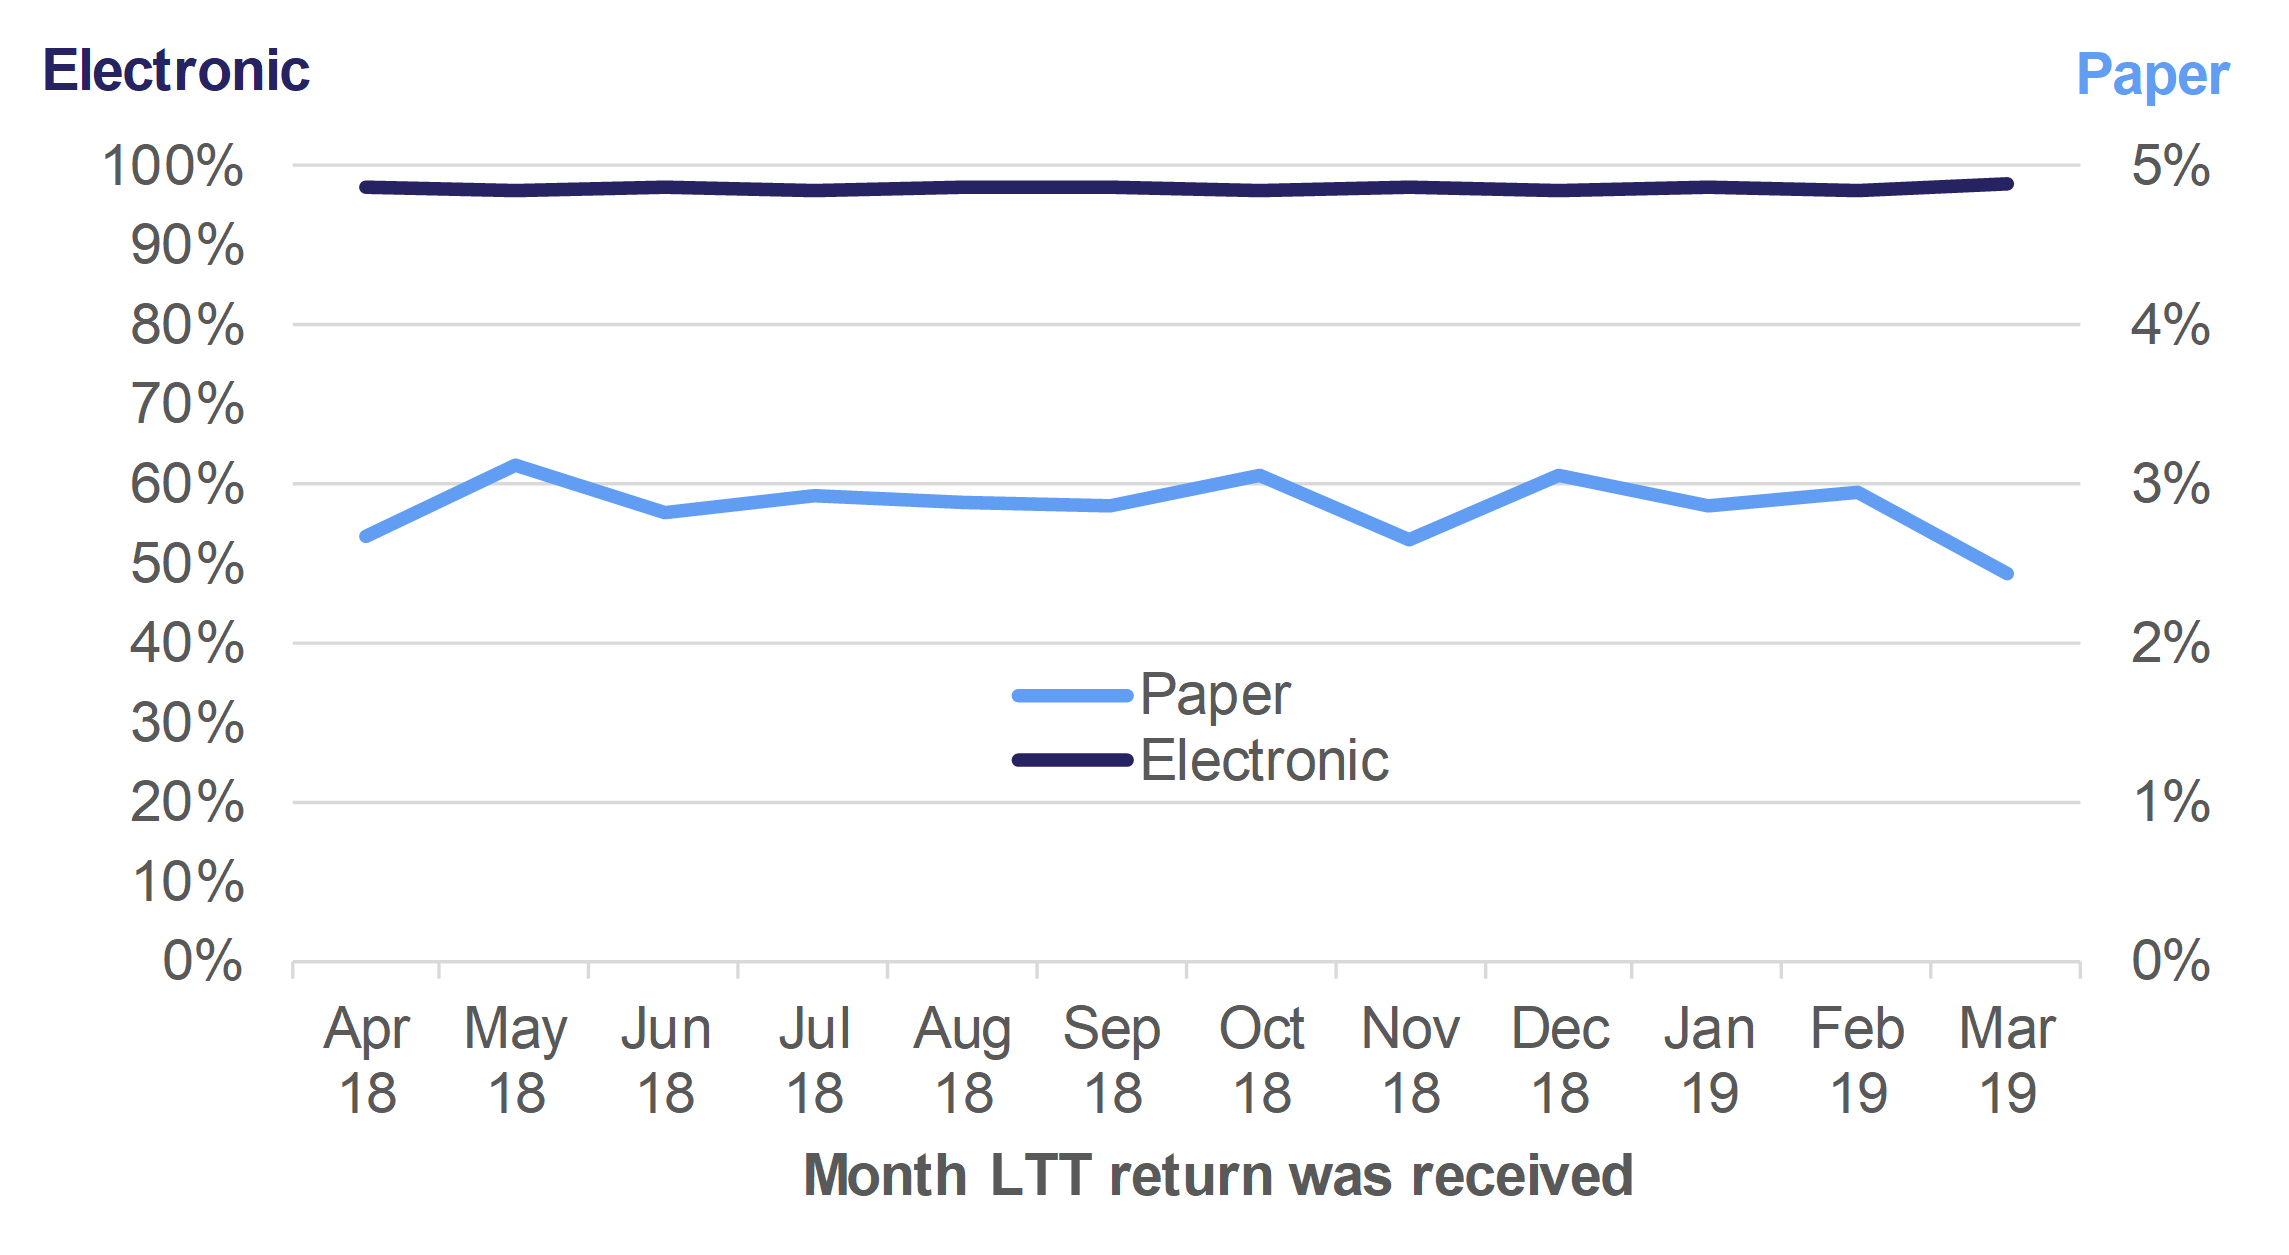 Figure 10.4 shows the monthly trend in Land Transaction Tax returns received electronically or by paper, for returns received in April 2018 to March 2019